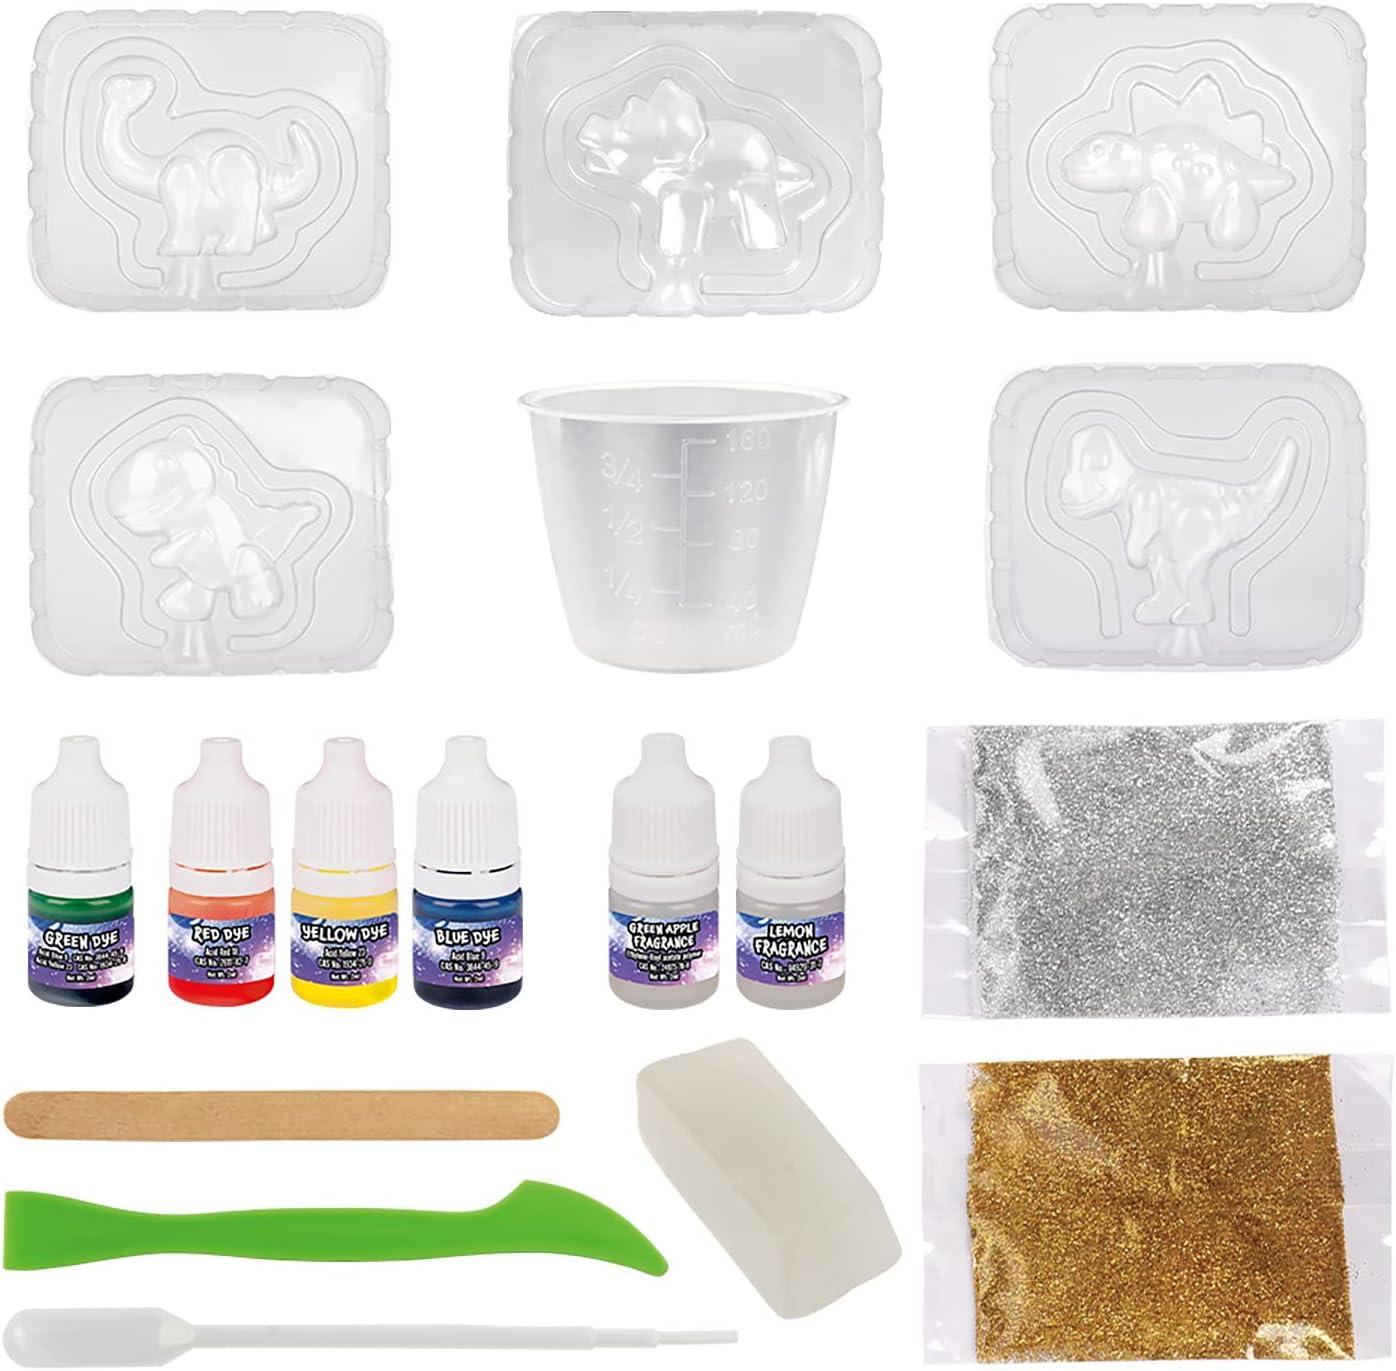 XXTOYS Dino Soap Making Kit - Science Experiments for Kids 6-8 - Dinosaur  Soap Crafts Kit for Girls & Boys Great Dinosaur Toys STEM Gift for Kids Fun  Educational Activity & Science